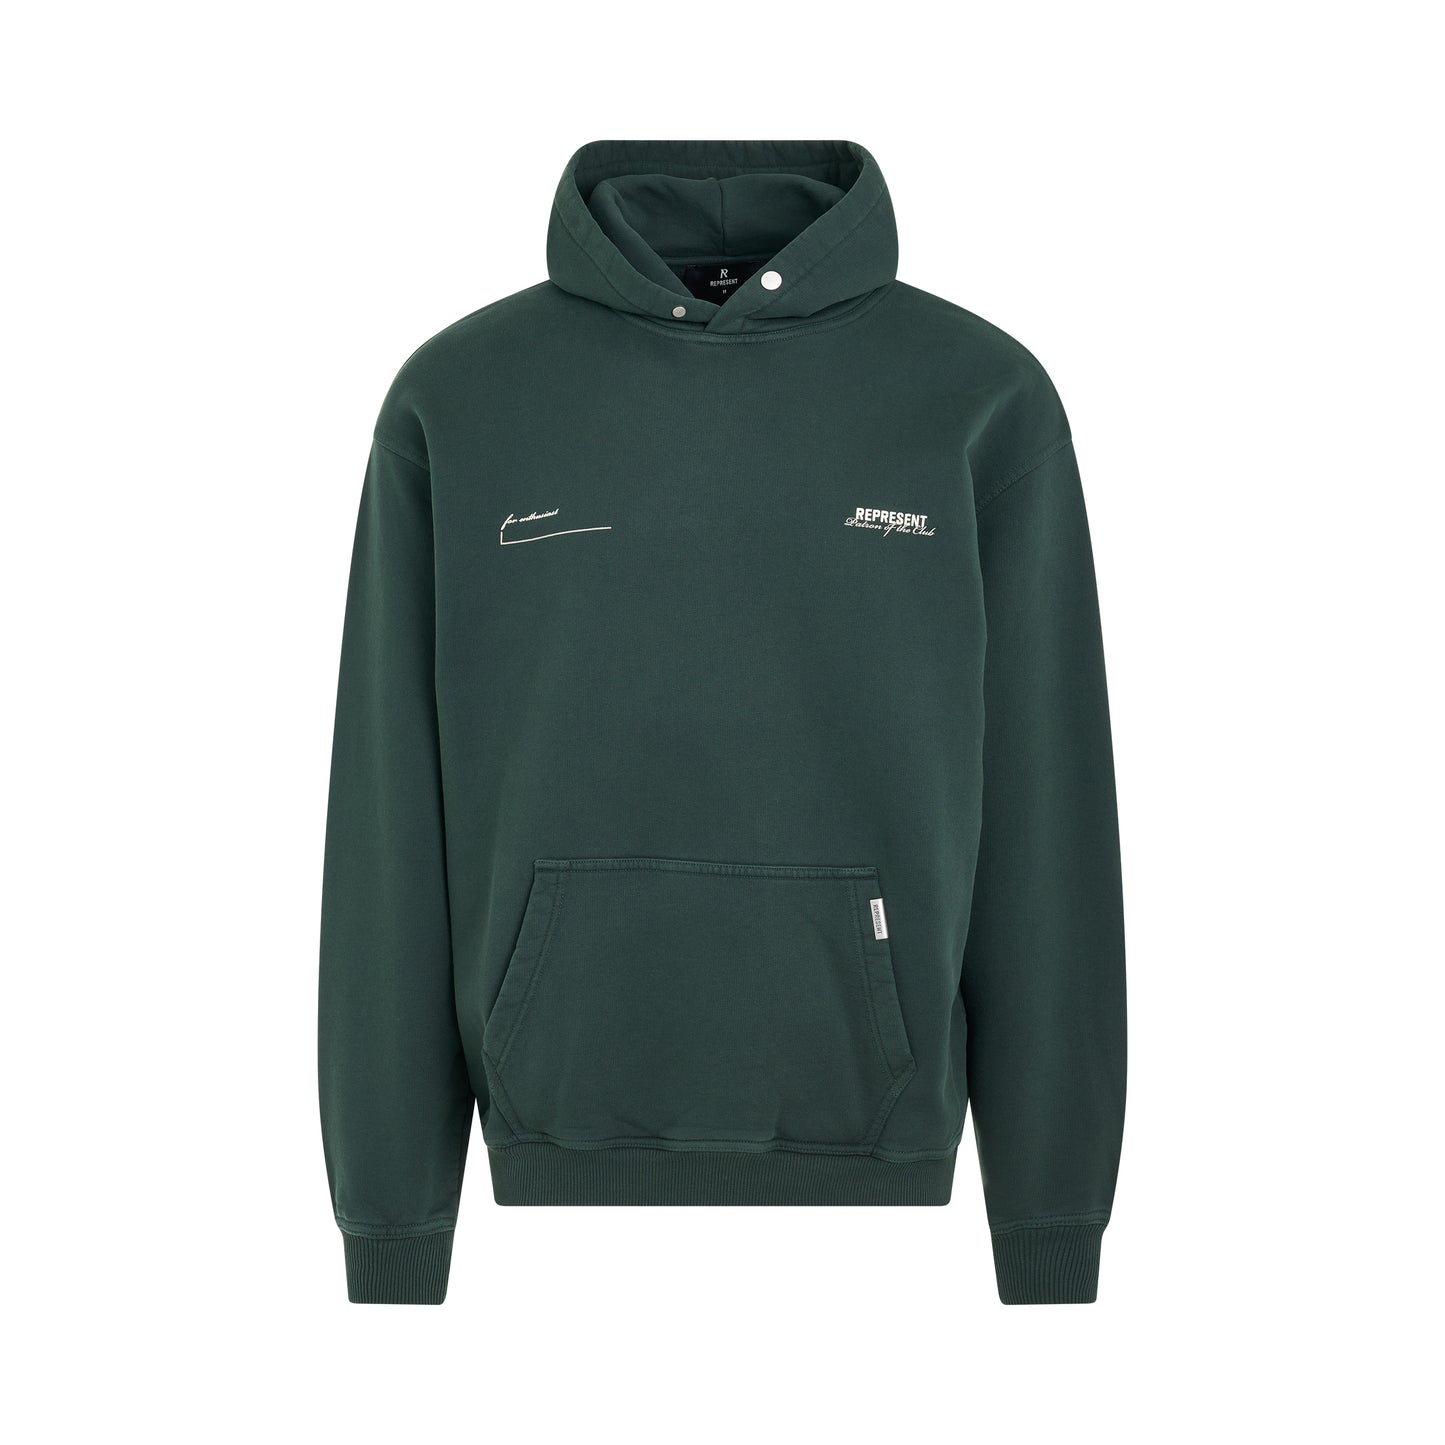 Patron of the Club Hoodie in Forest Green